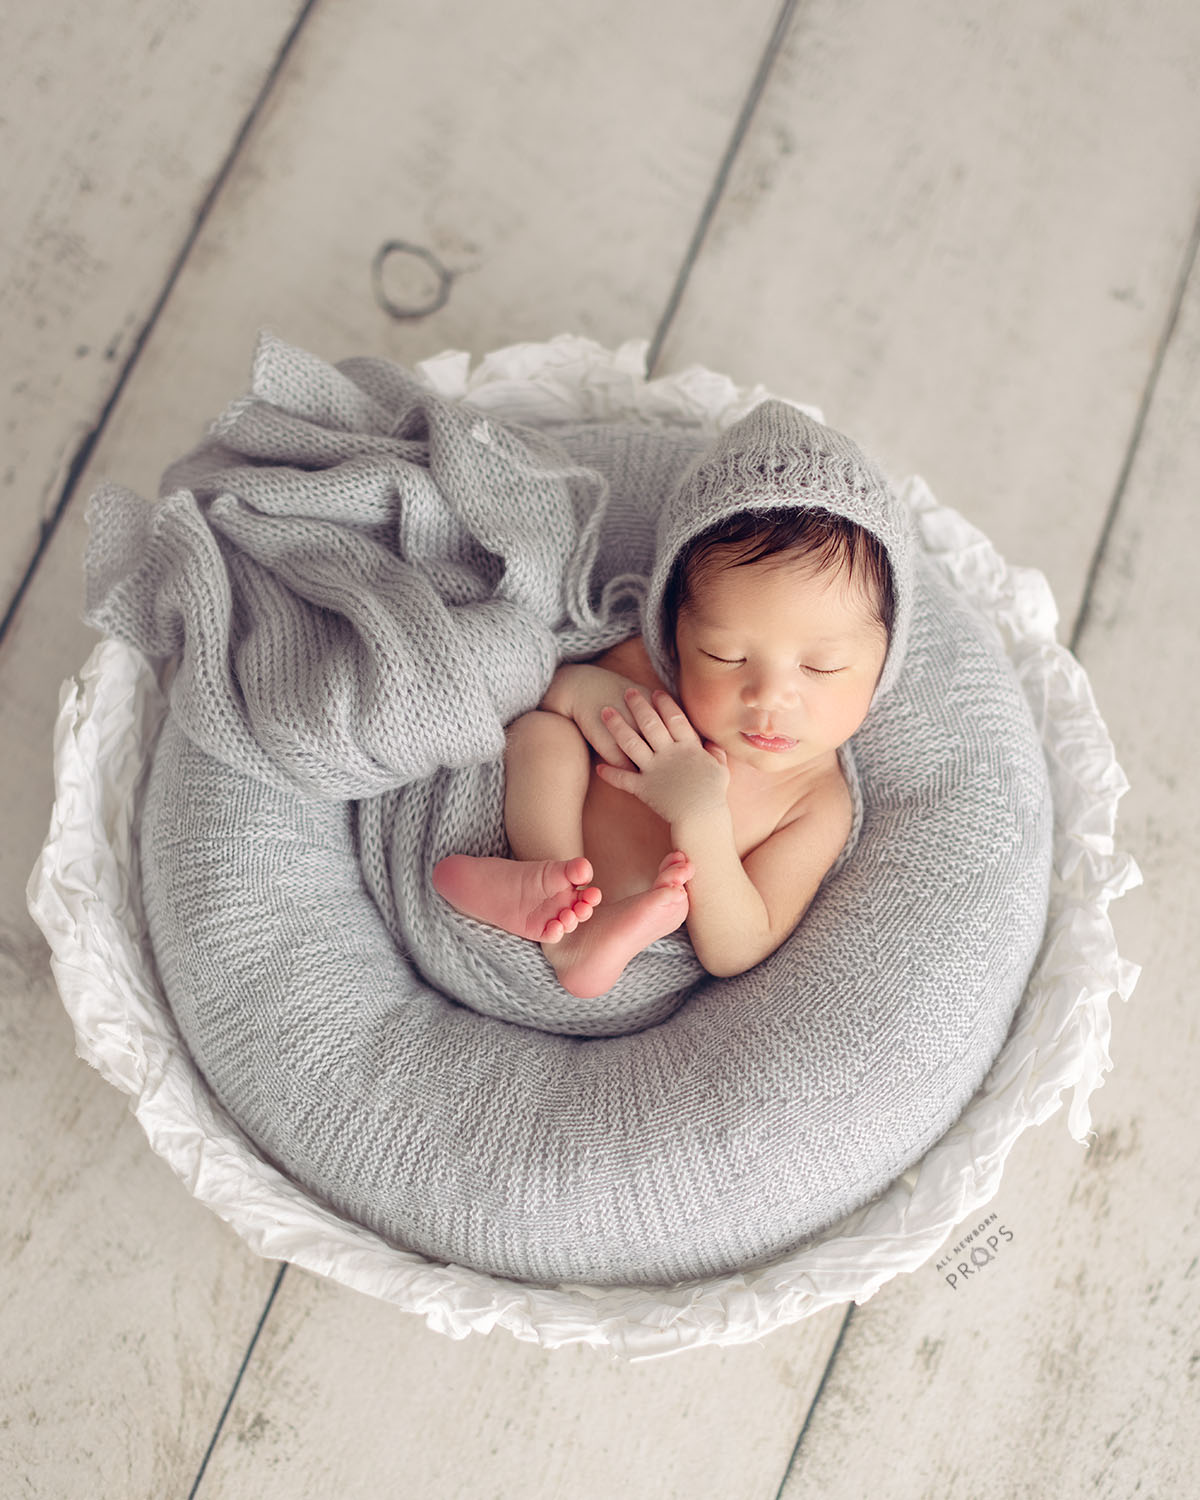 Best Props for Newborn Photography | Newborn baby photoshoot, Newborn baby  photography, Diy newborn photography props